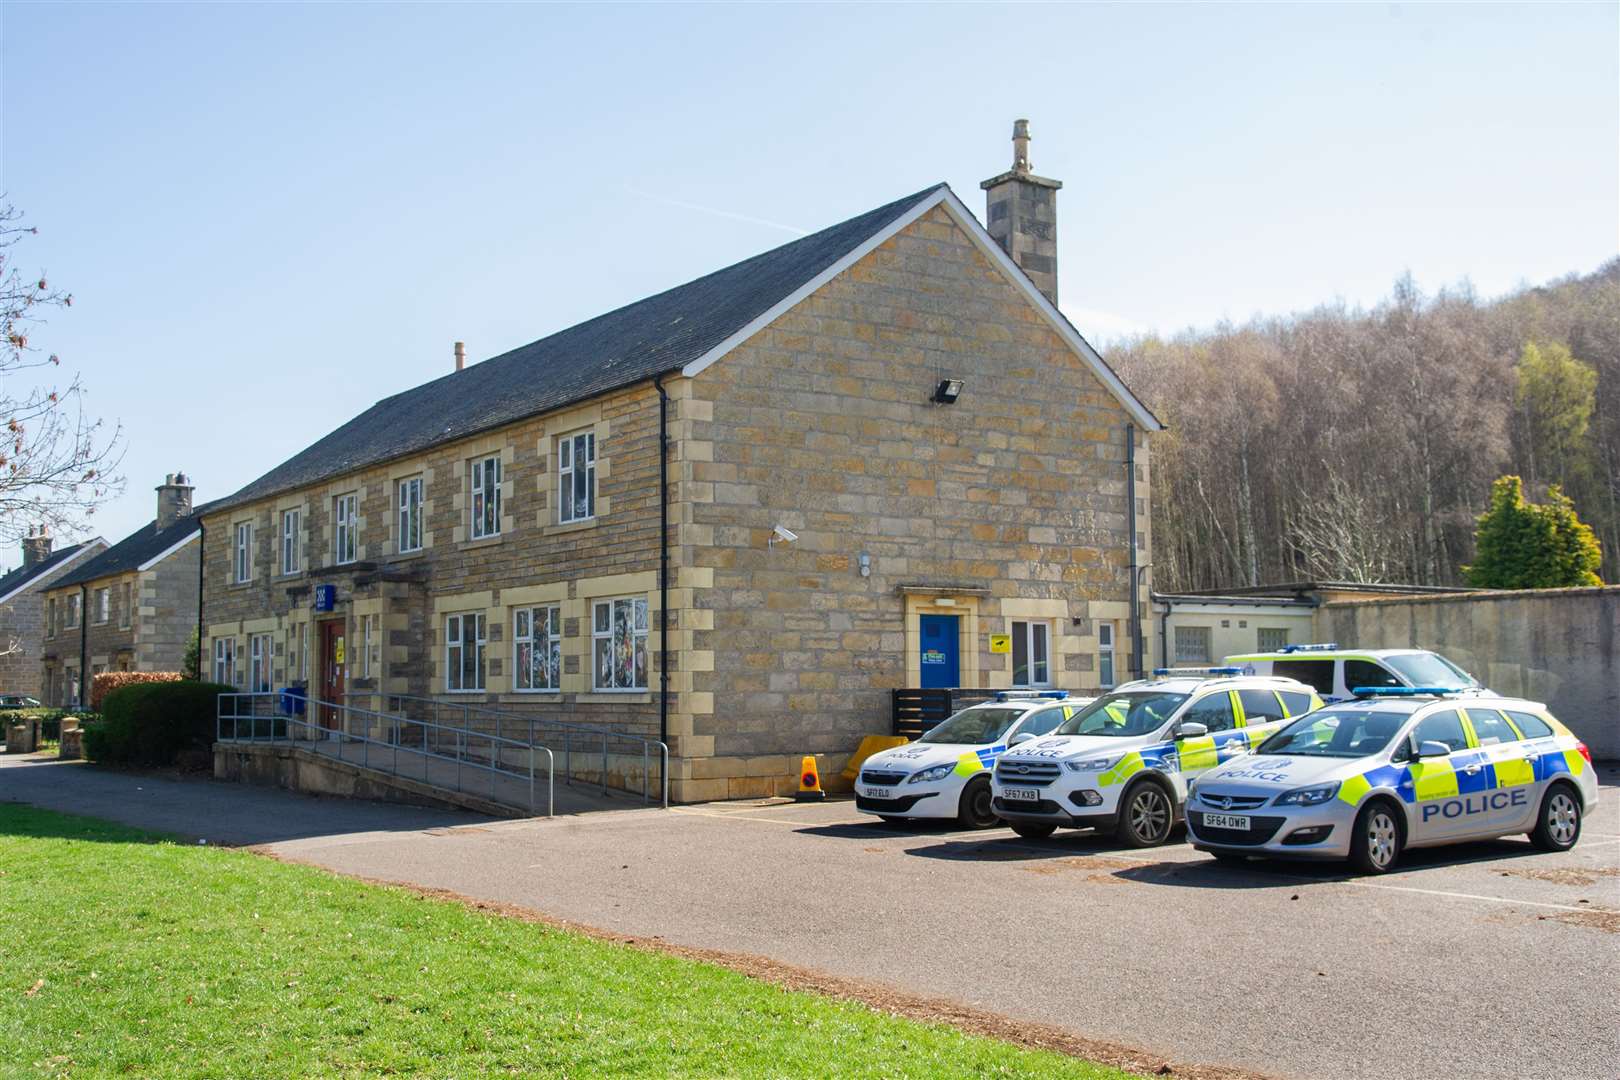 Forres Police Station on Victoria Road, Forres...Picture: Highland News & Media..